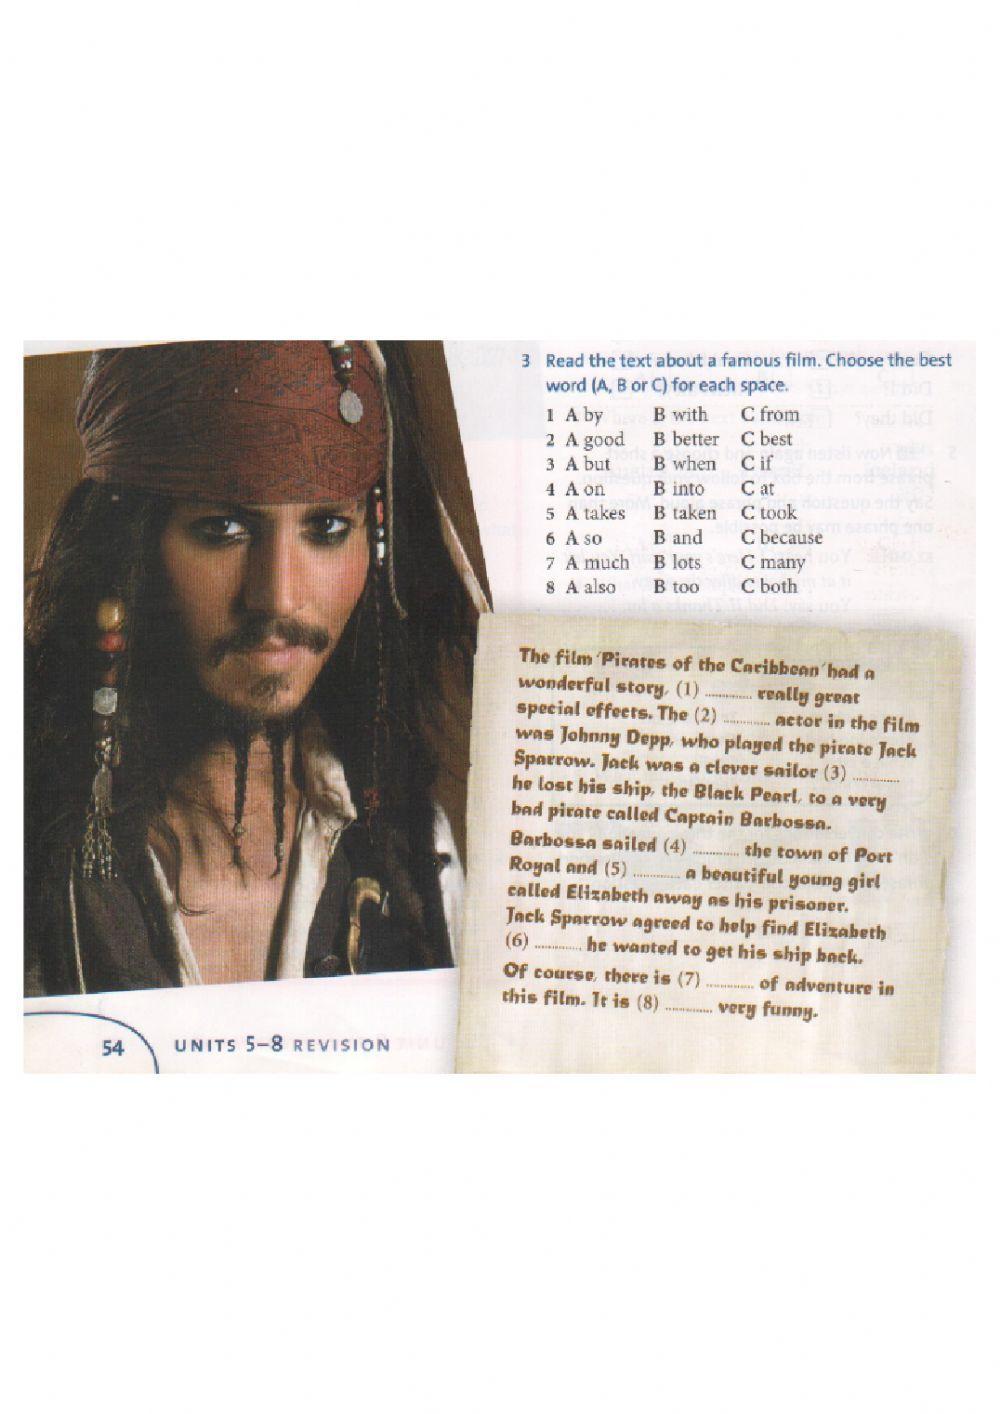 Complete the text about Pirates of the Caribbean